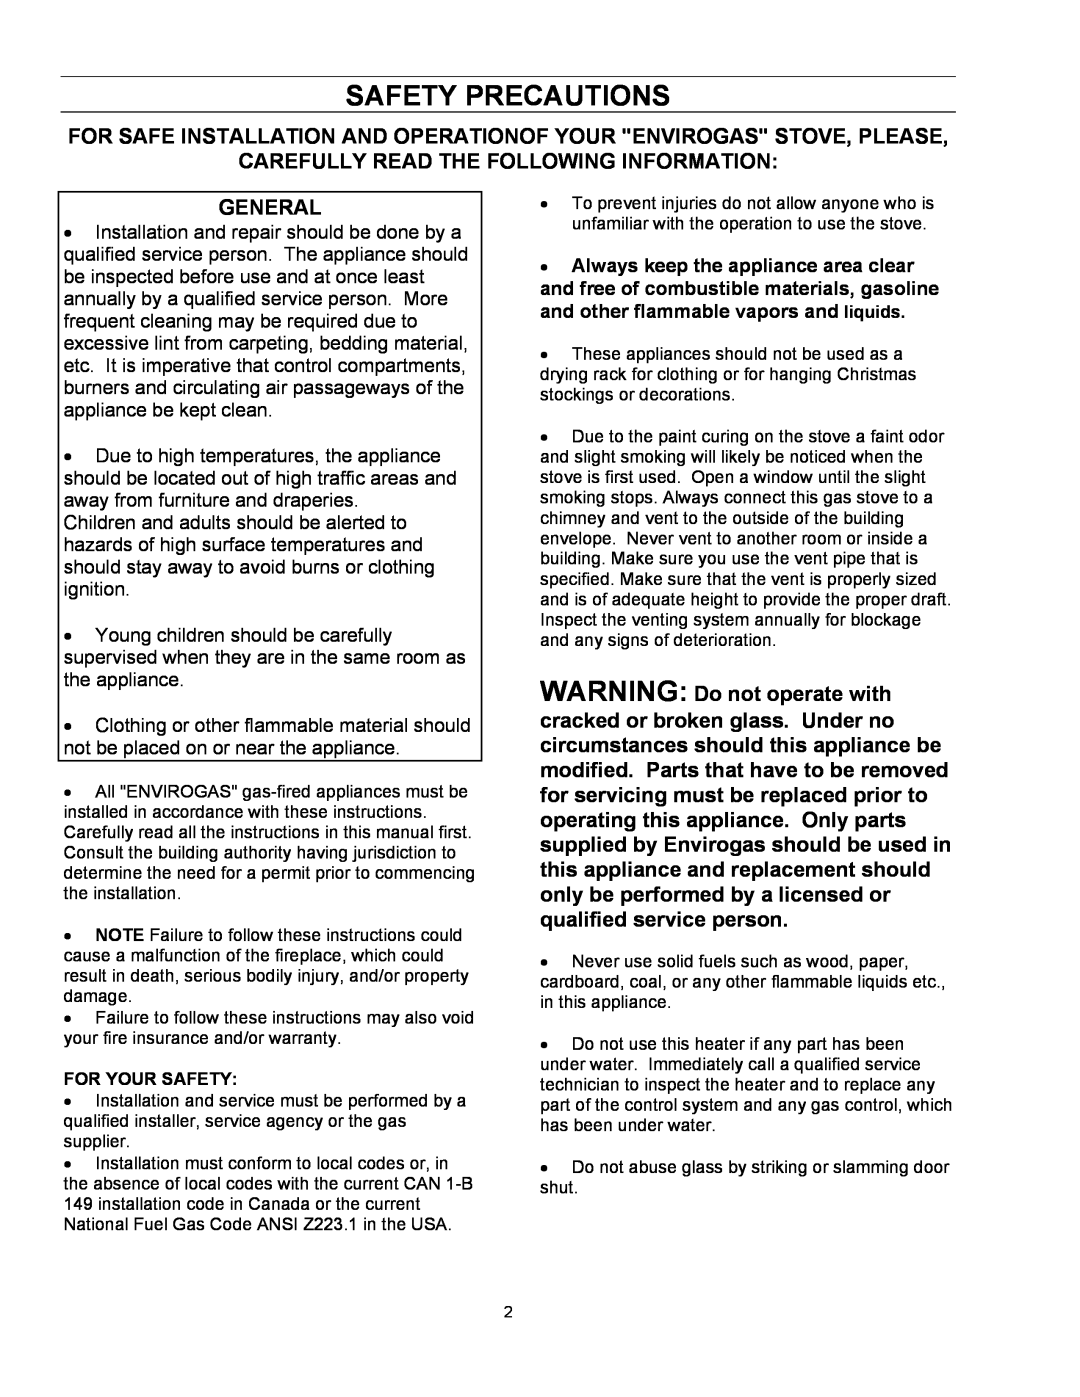 Enviro EG 28 B owner manual Safety Precautions, Carefully Read The Following Information, General 